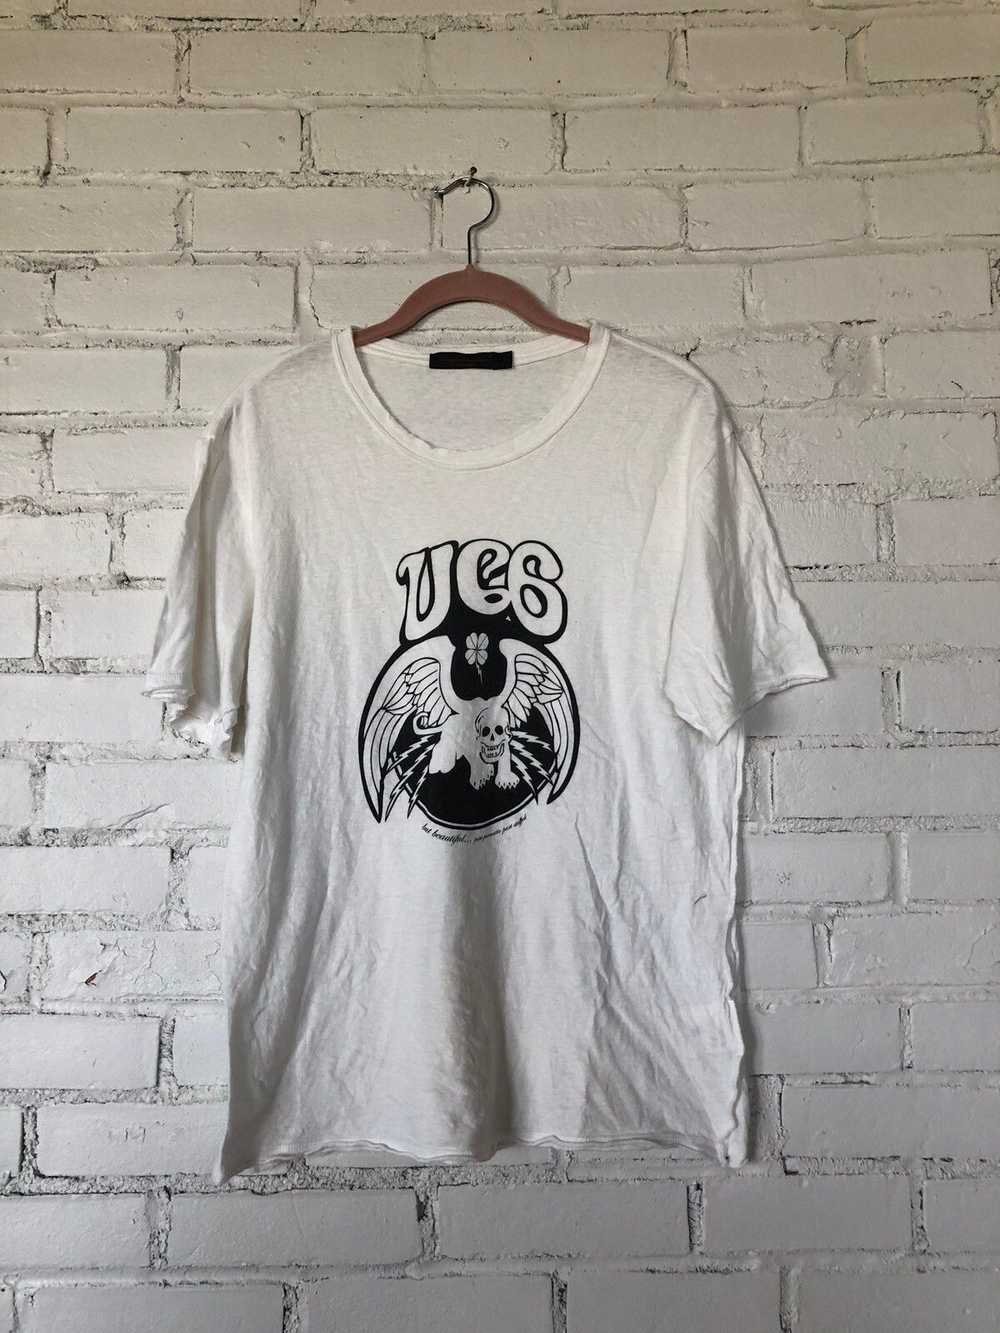 Undercover Undercover Tee - image 1